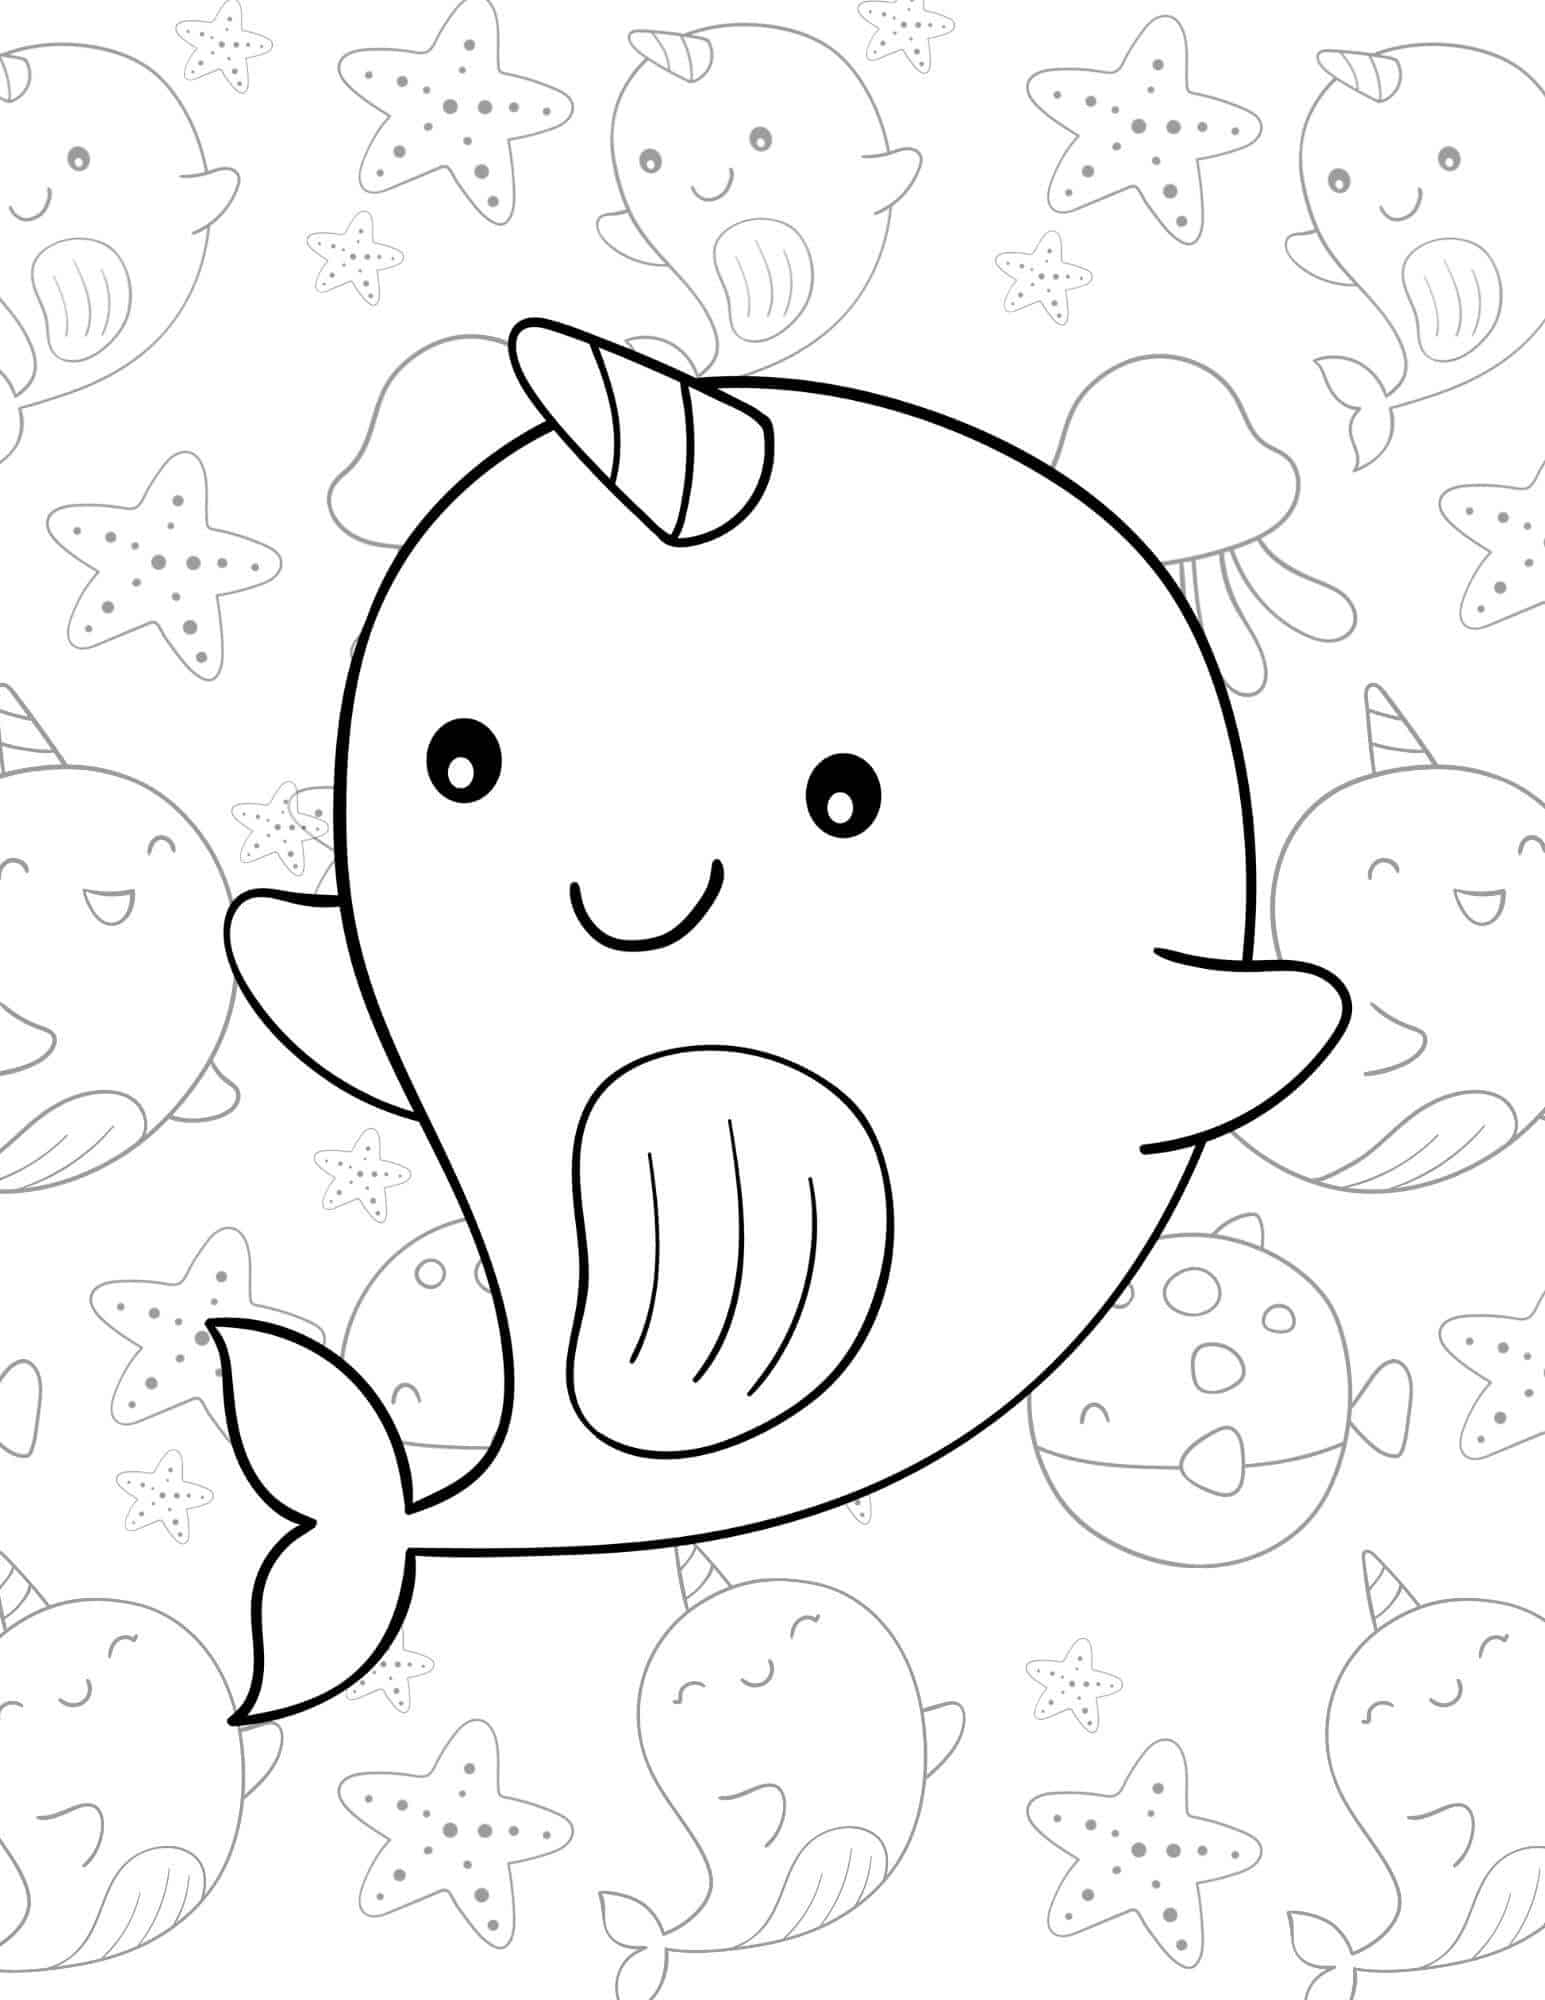 Cute narwhal coloring pages